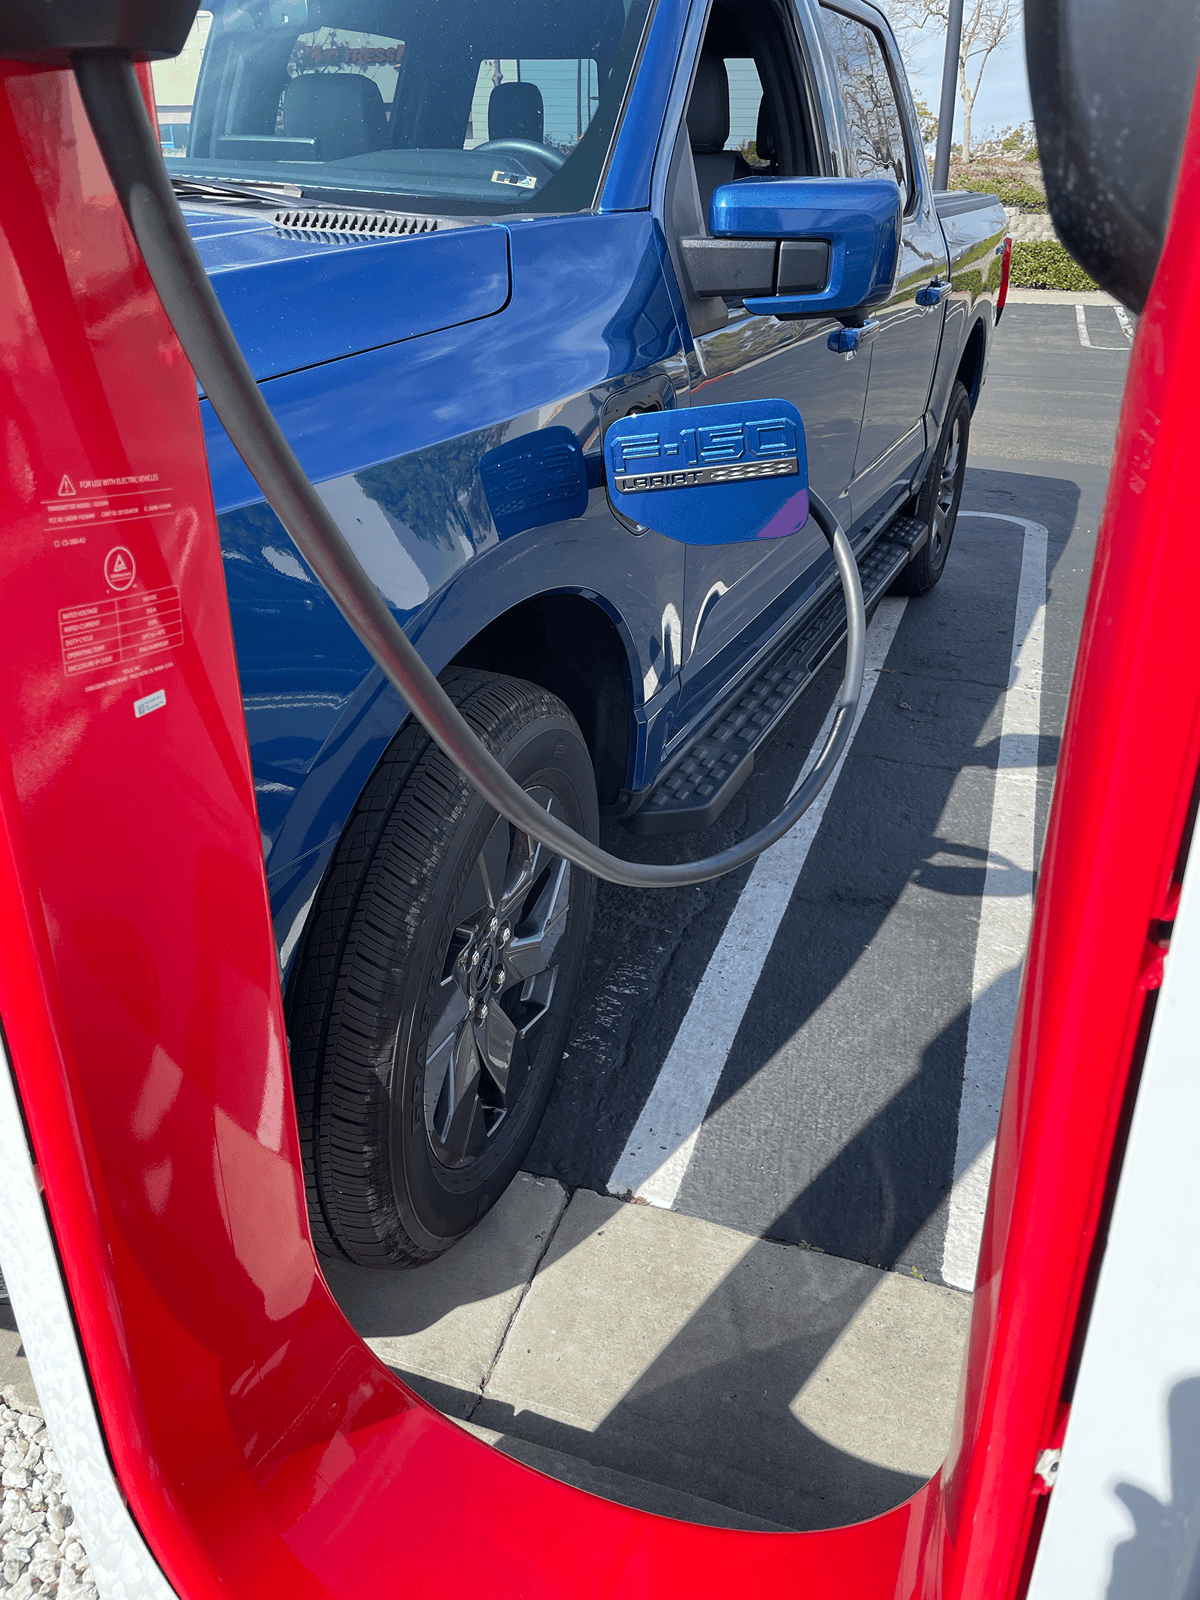 Ford F-150 Lightning Photos from new Tesla Supercharging station w/ new charger placement (for trucks) tempImageBa6J7w